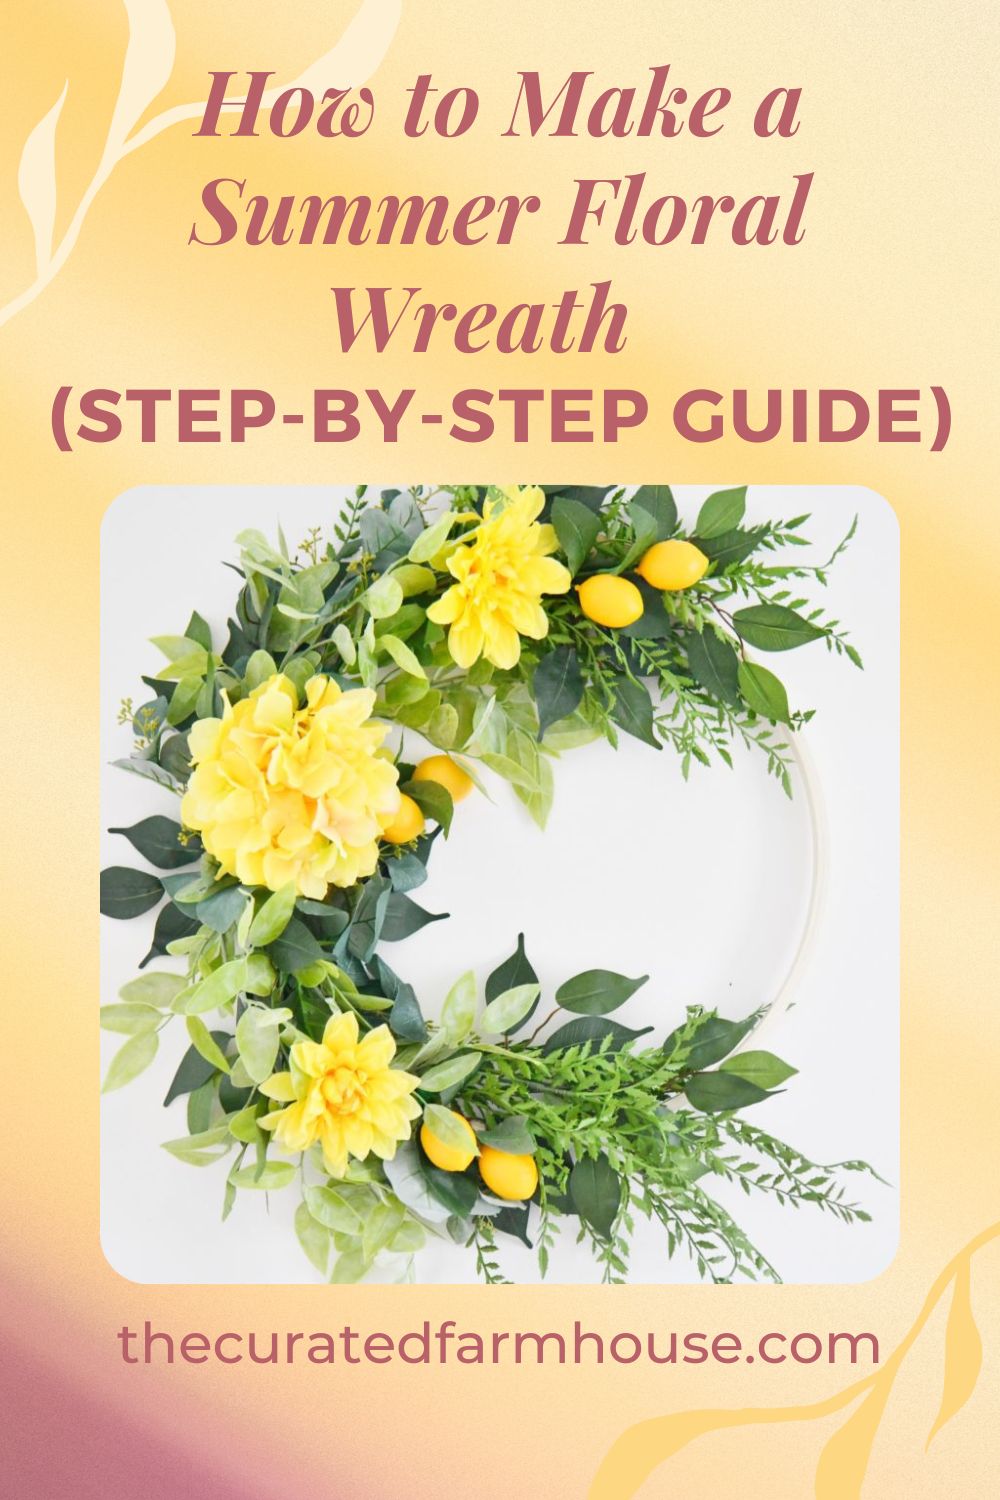 How to Make a Summer Floral Wreath (Step-by-Step Guide)